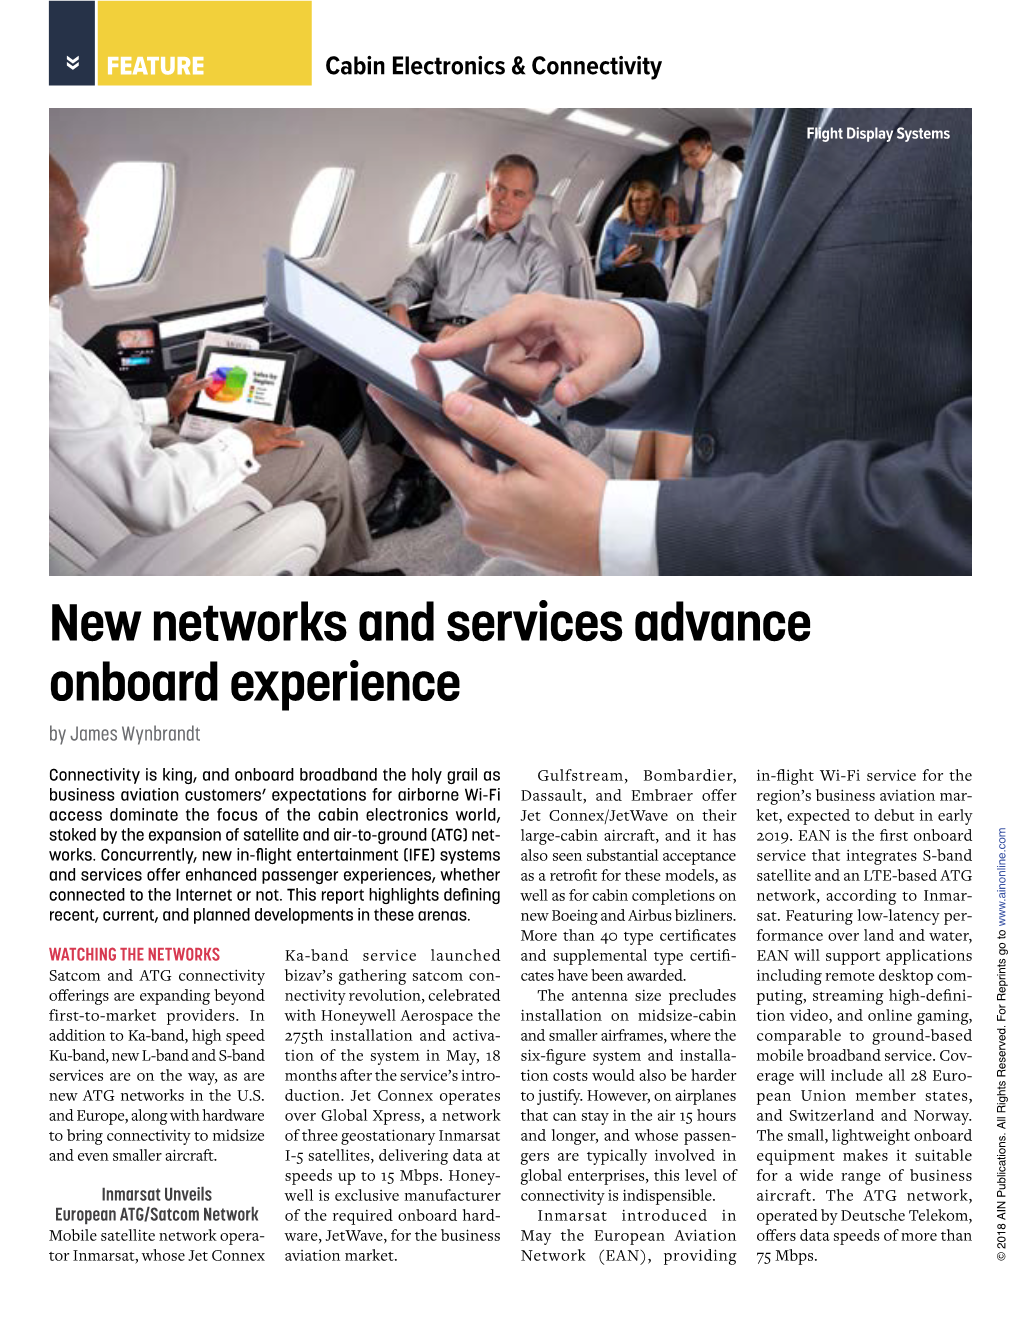 New Networks and Services Advance Onboard Experience